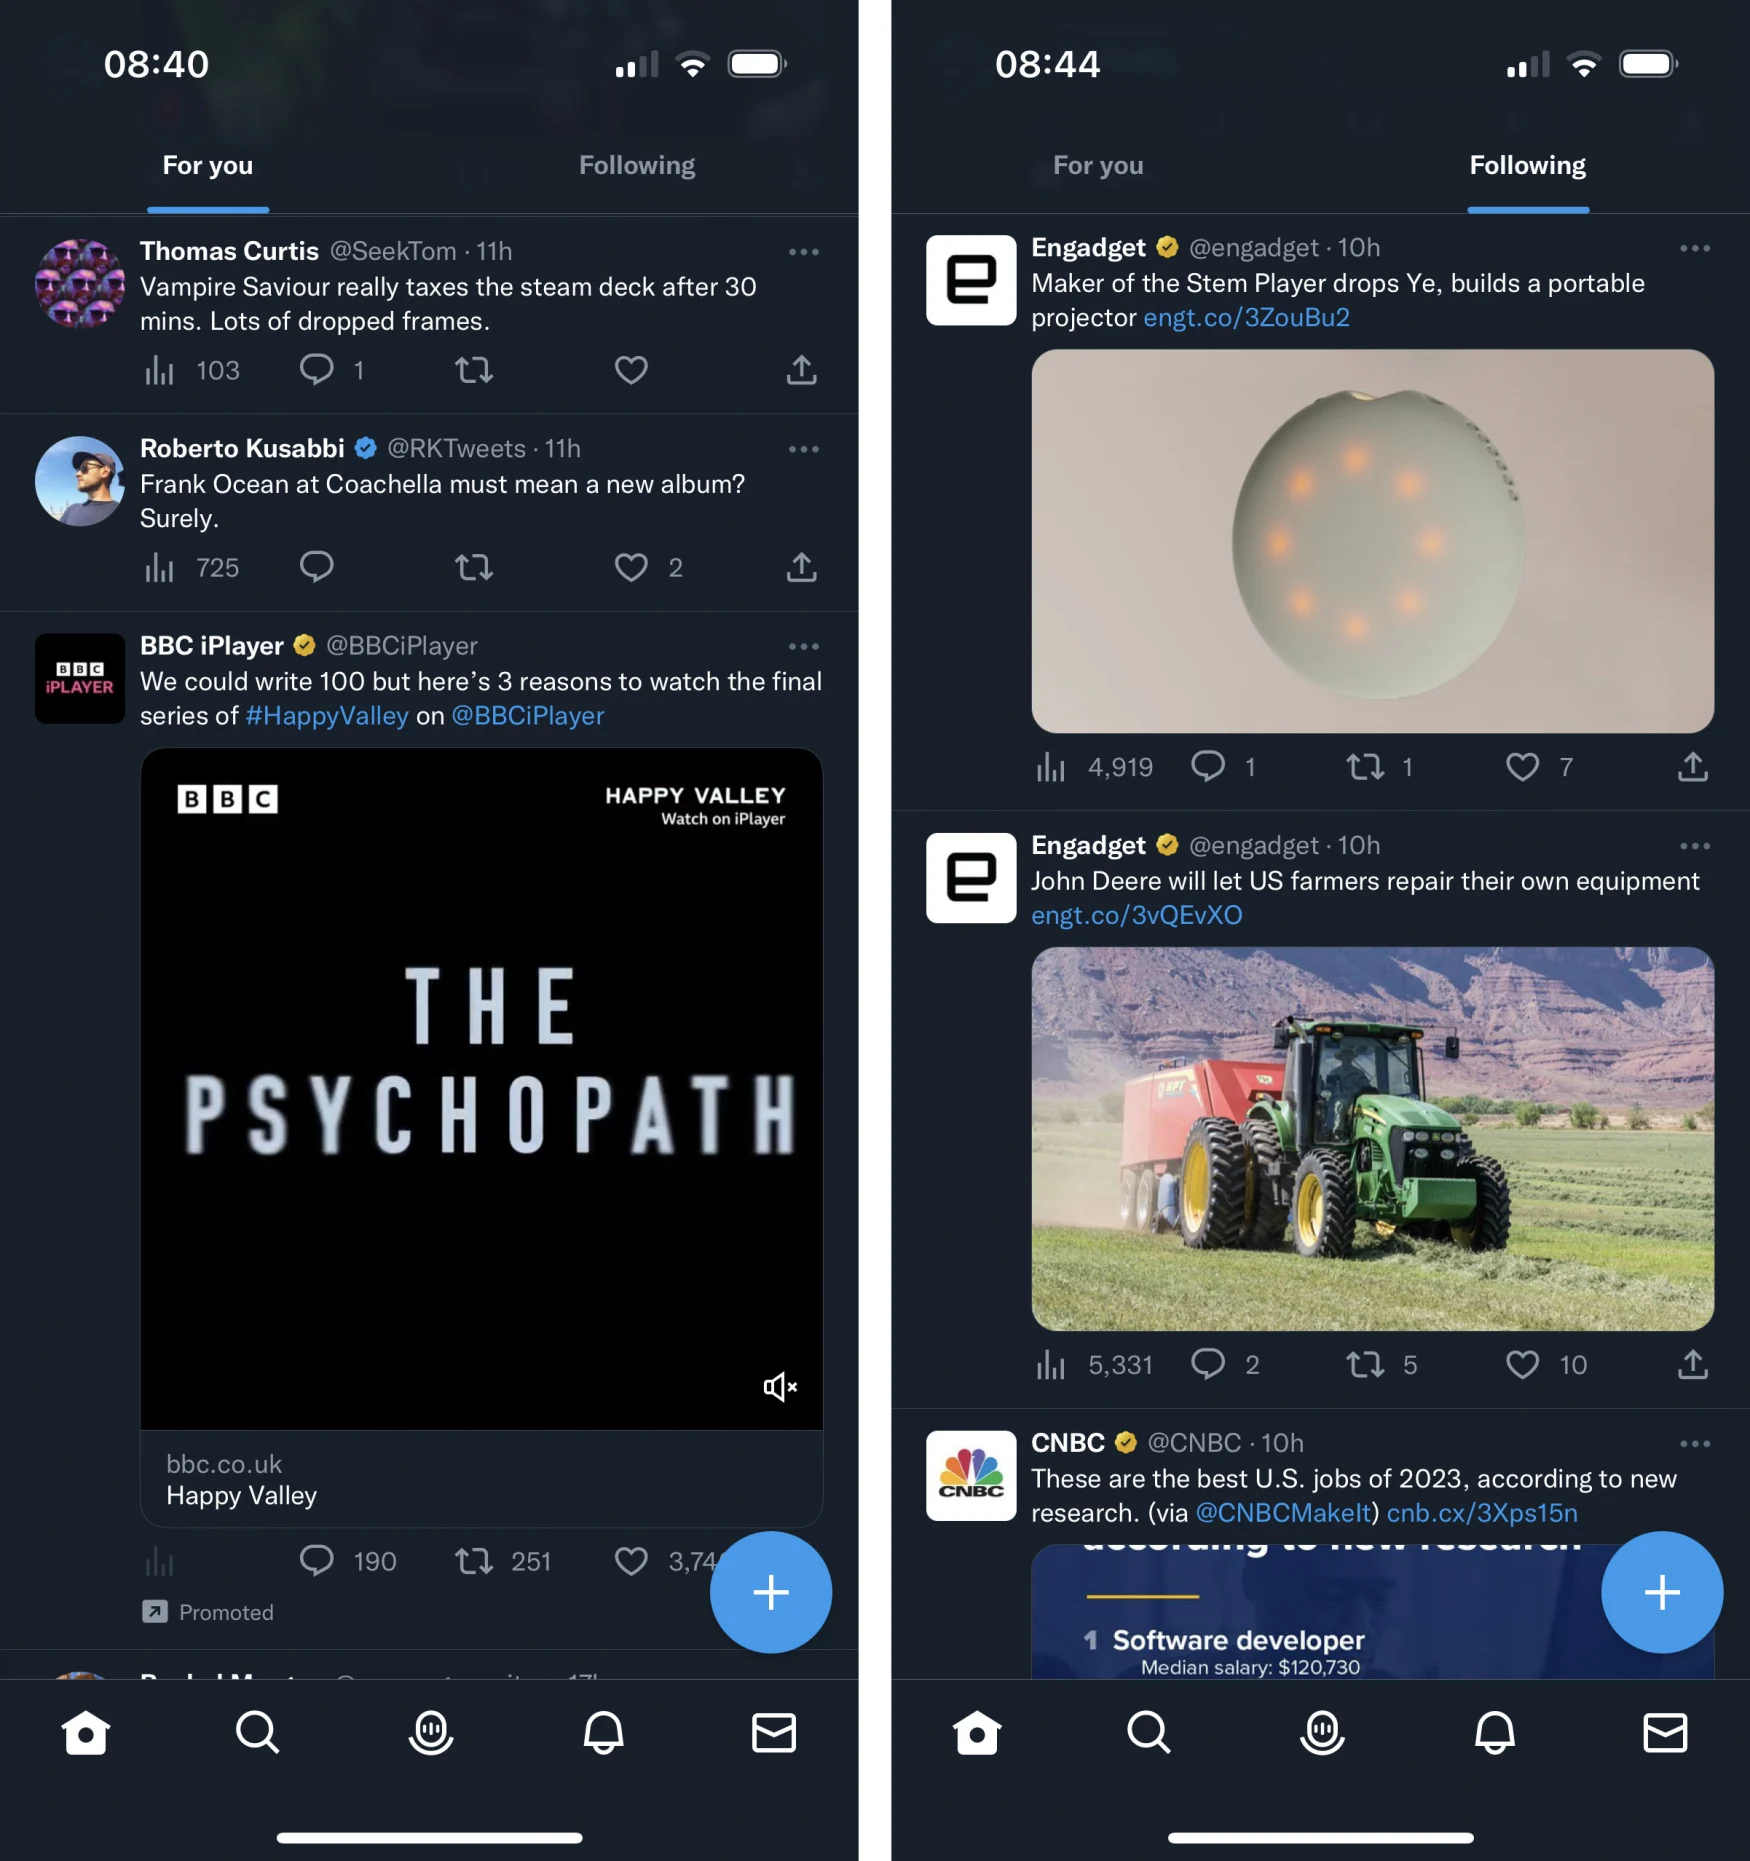 Twitter for iOS now features an algorithmic 'For You' page as the default